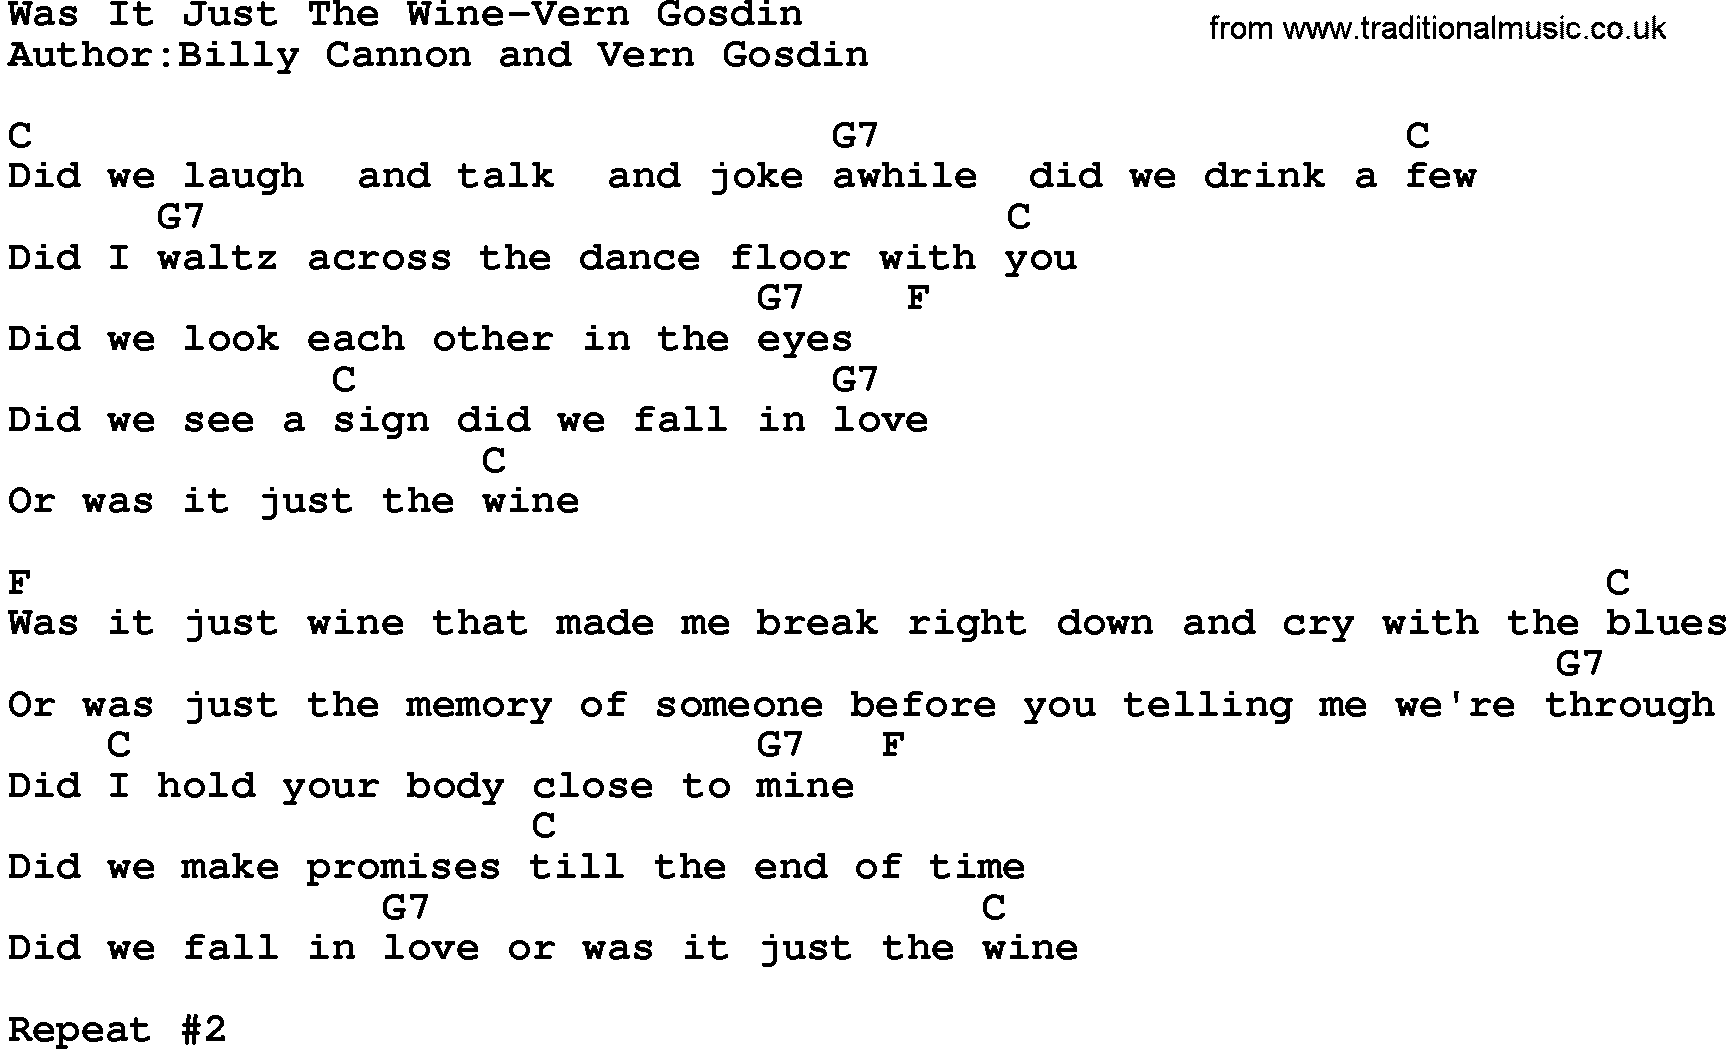 Country music song: Was It Just The Wine-Vern Gosdin lyrics and chords